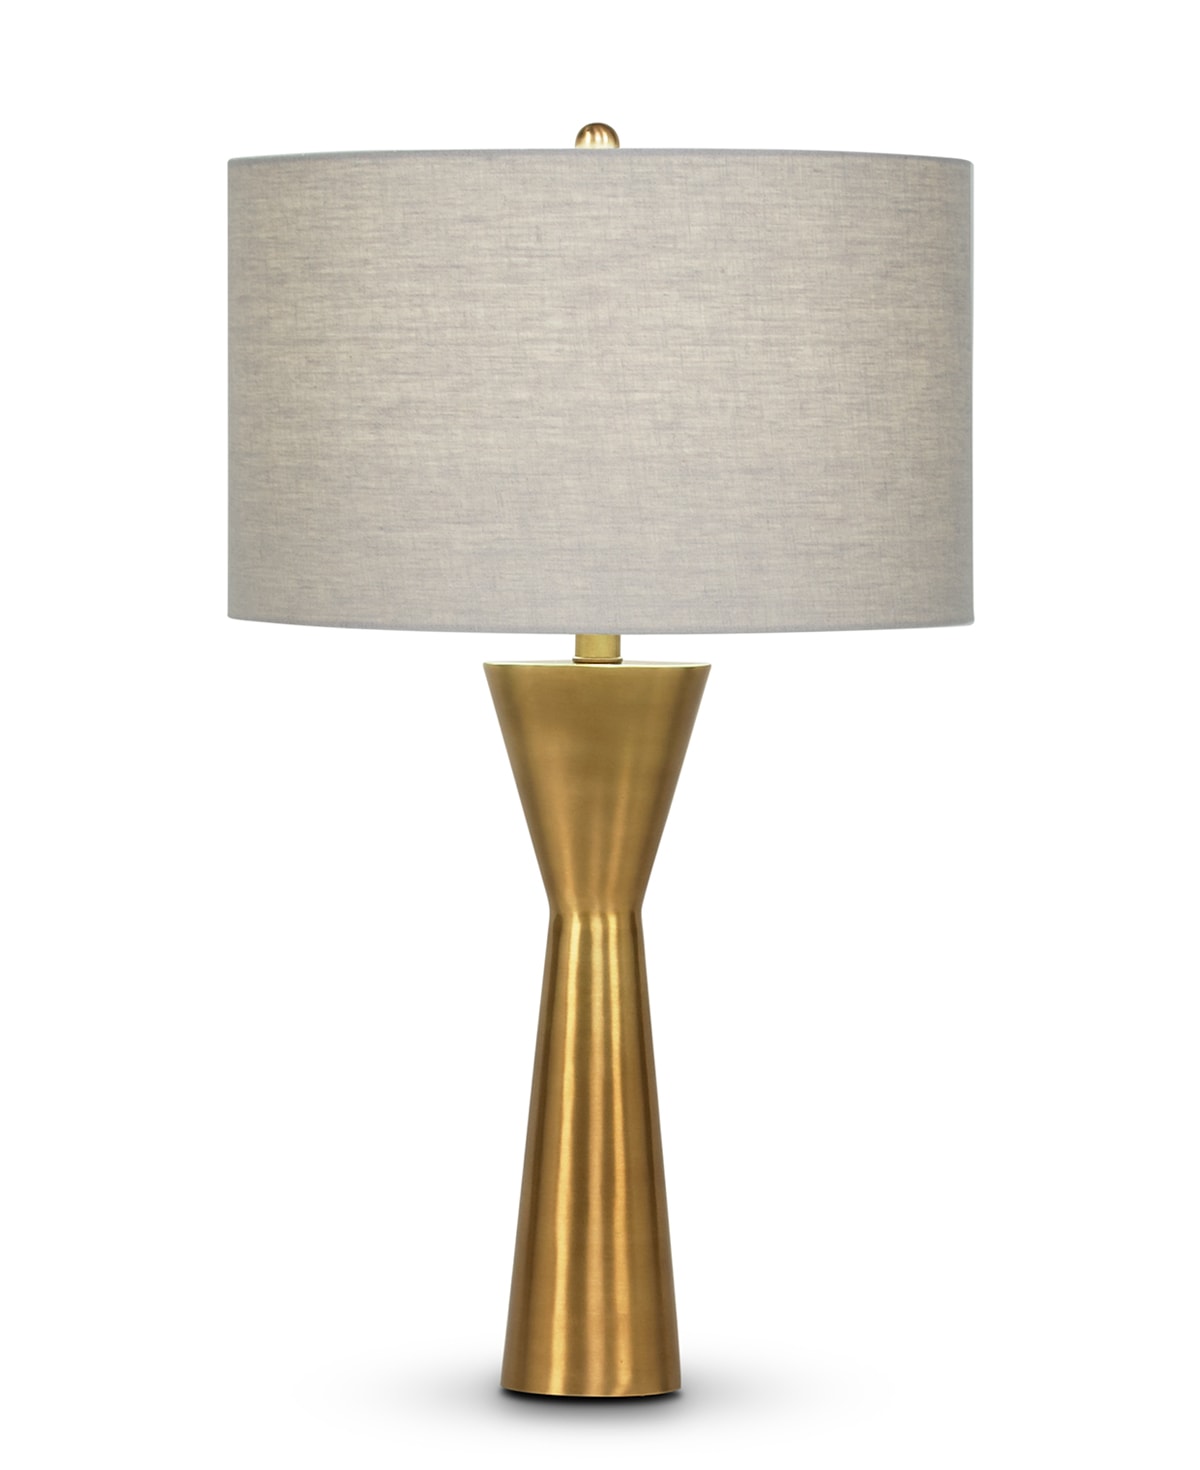 FlowDecor Essex Table Lamp in metal with antique brass finish and beige linen drum shade (# 3591)